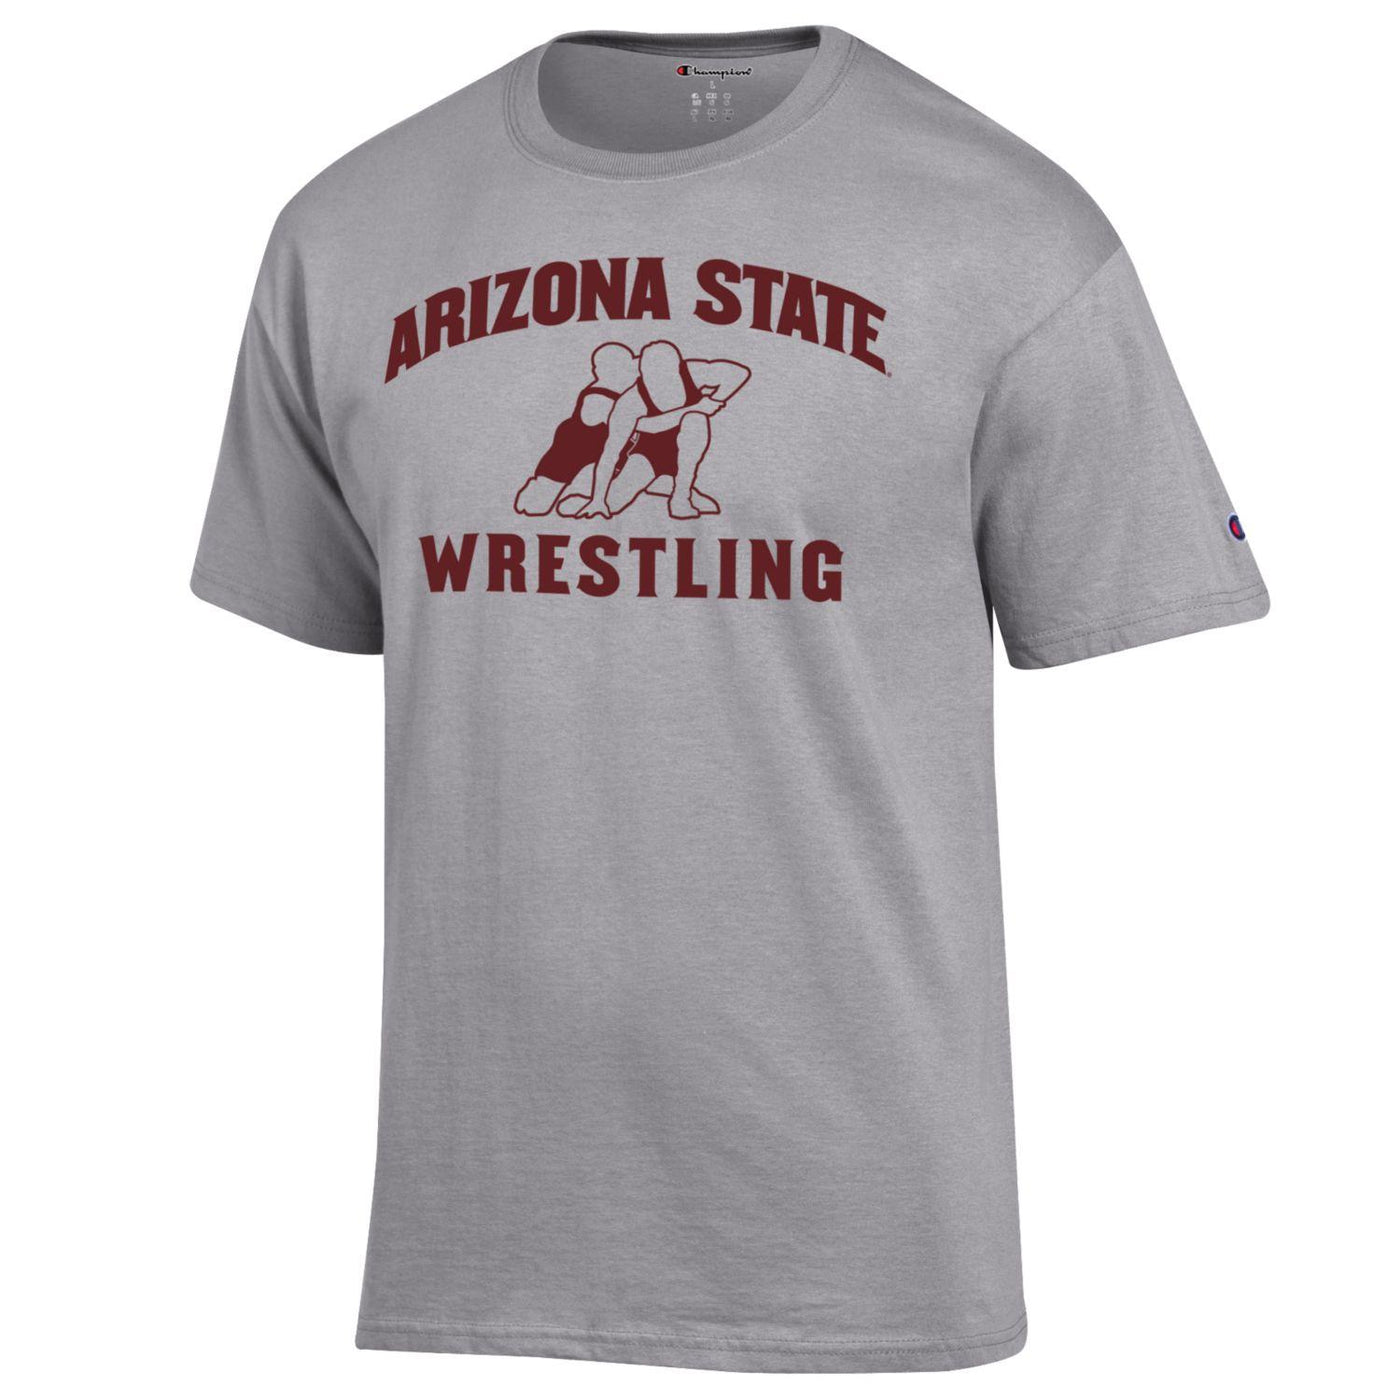 ASU gray tee with Arizona State wrestling printed in maroon around outlines of two male figures in wrestling positions.